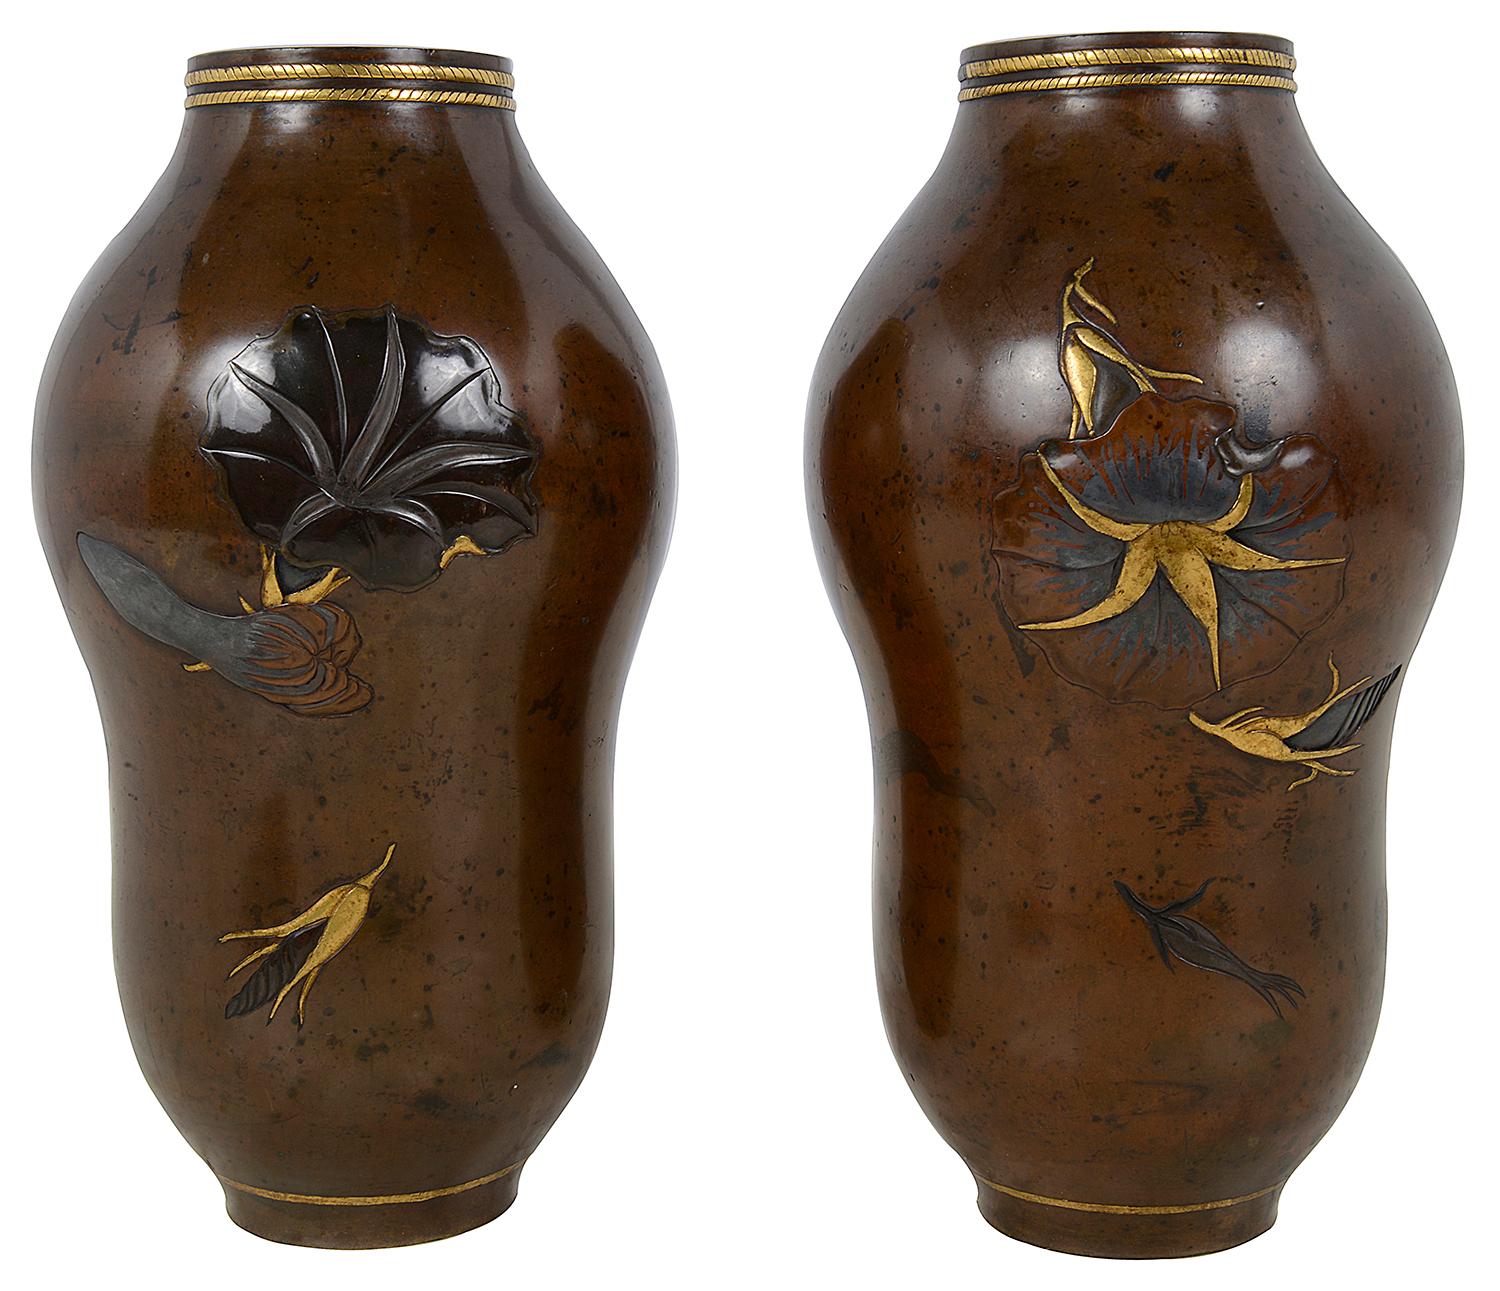 A very stylish pair of Japanese Meiji period (1868-1912) patinated bronze overlay vases, having wonderful exotic flowers with gilded high lights.